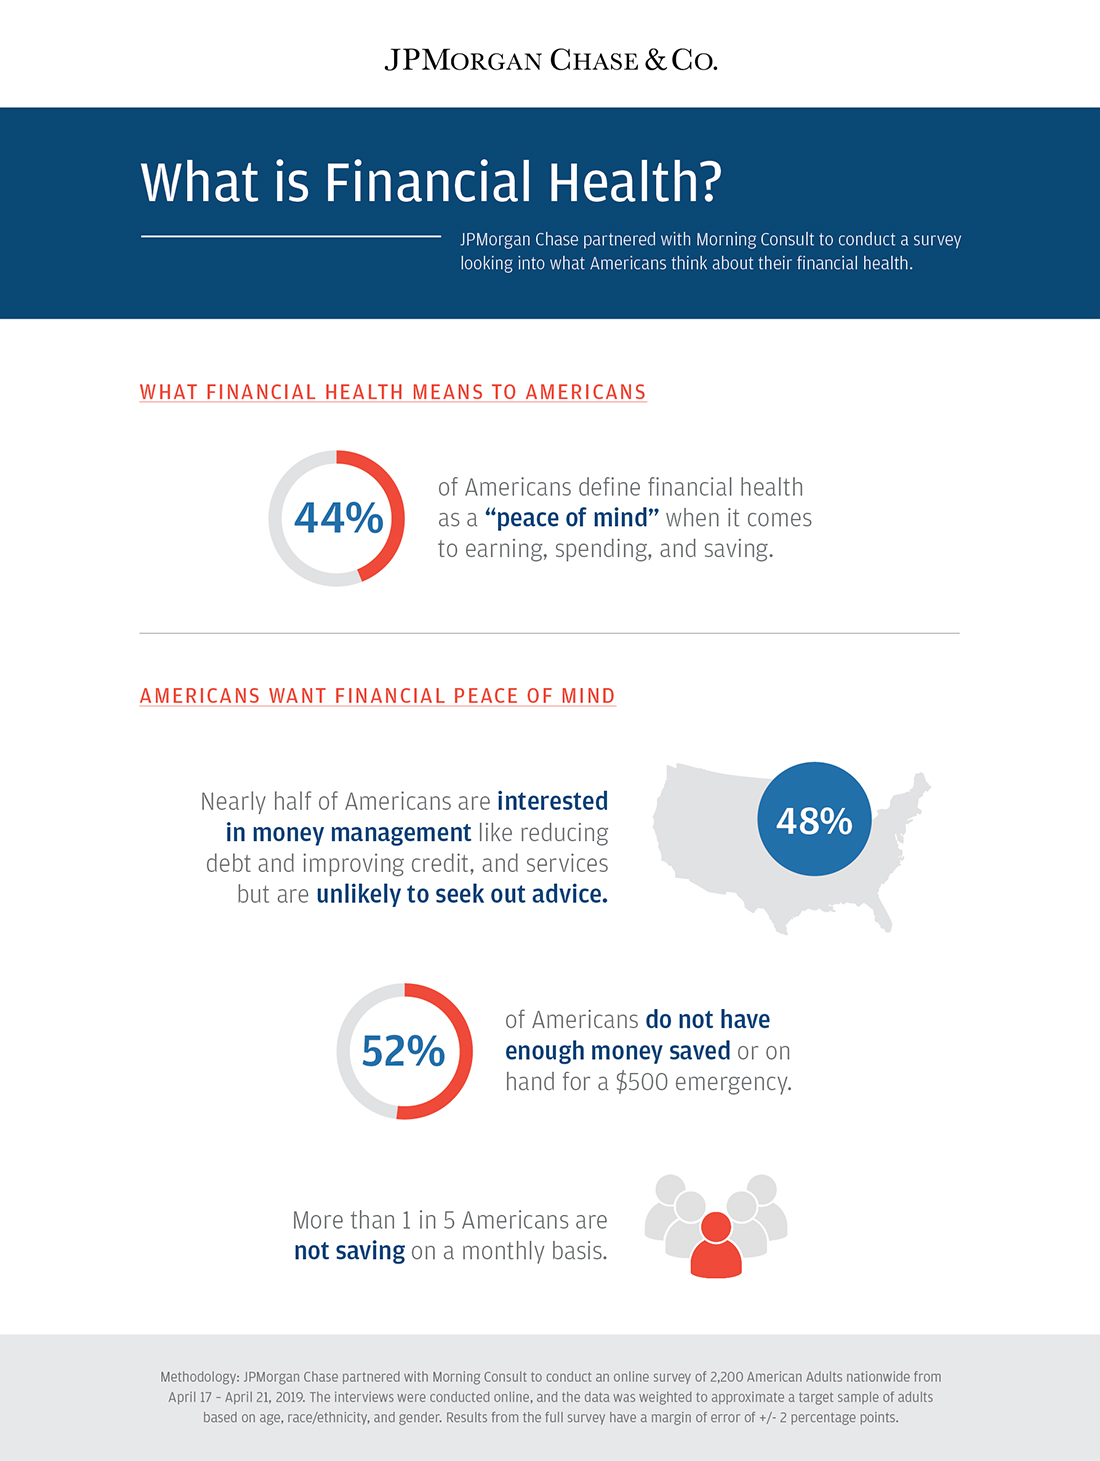 Infographic describing what is financial health means to Americans